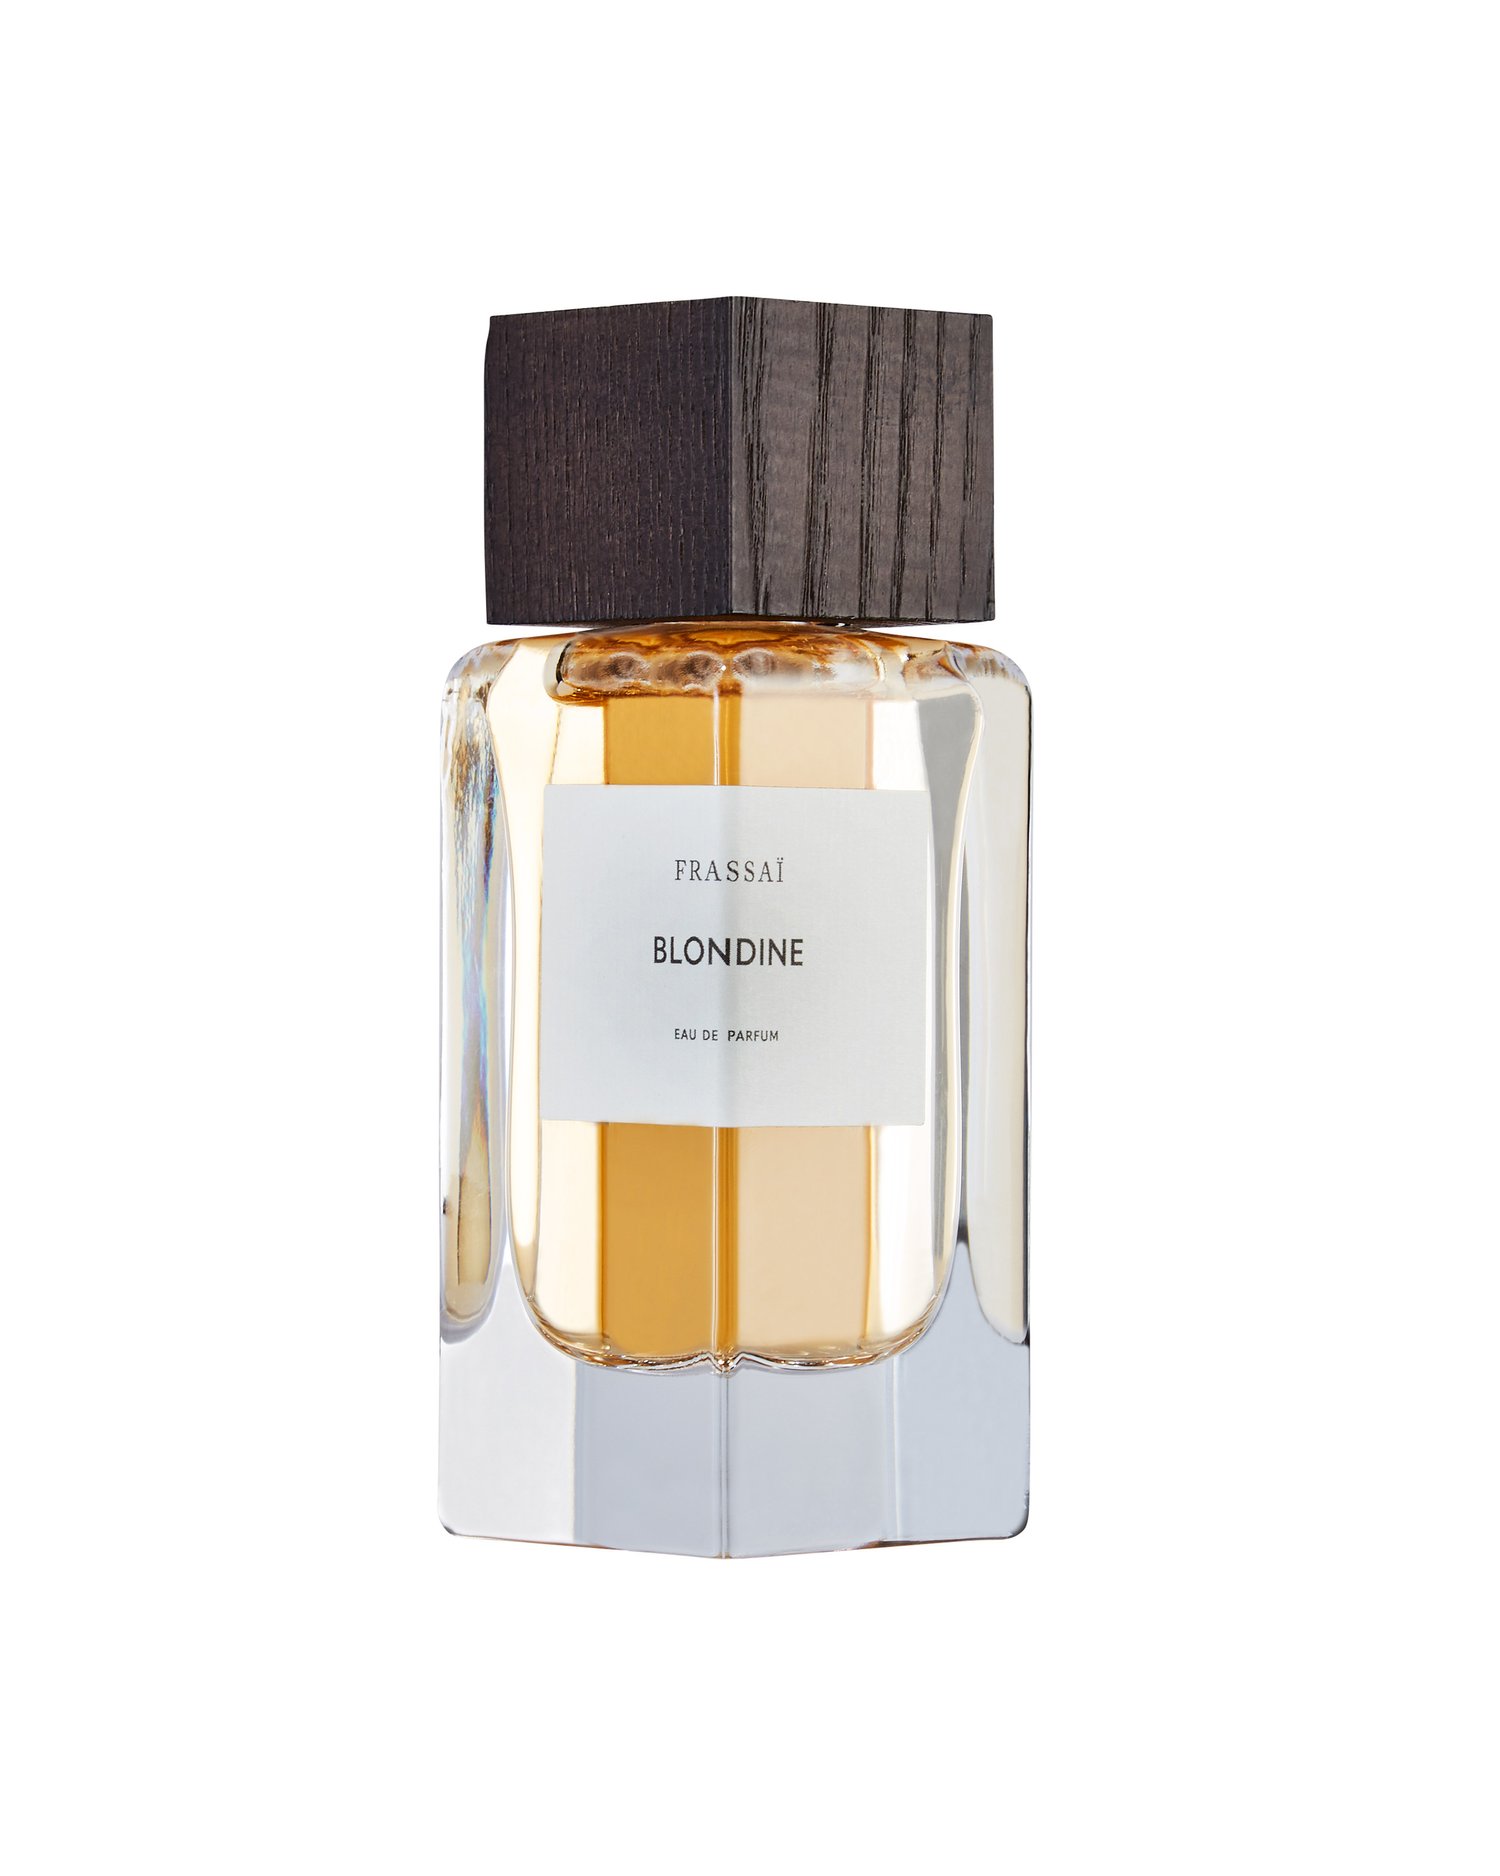 Blondine Frassai eau de parfum is the best selling fragrance in our collection of slow perfumes — Frassaï